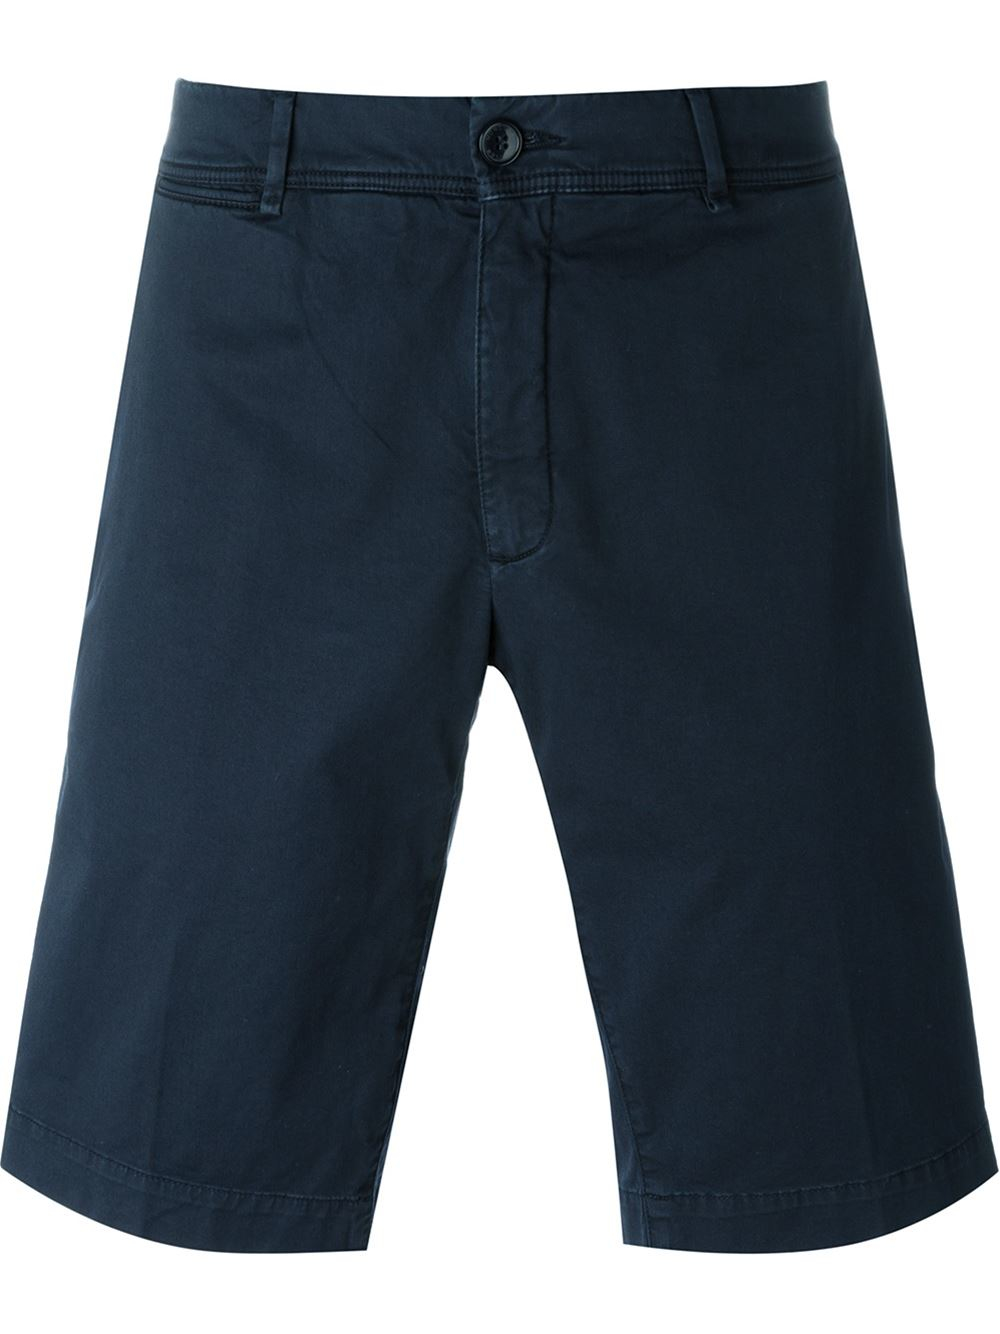 Lyst - Moncler Chino Bermuda Shorts in Blue for Men